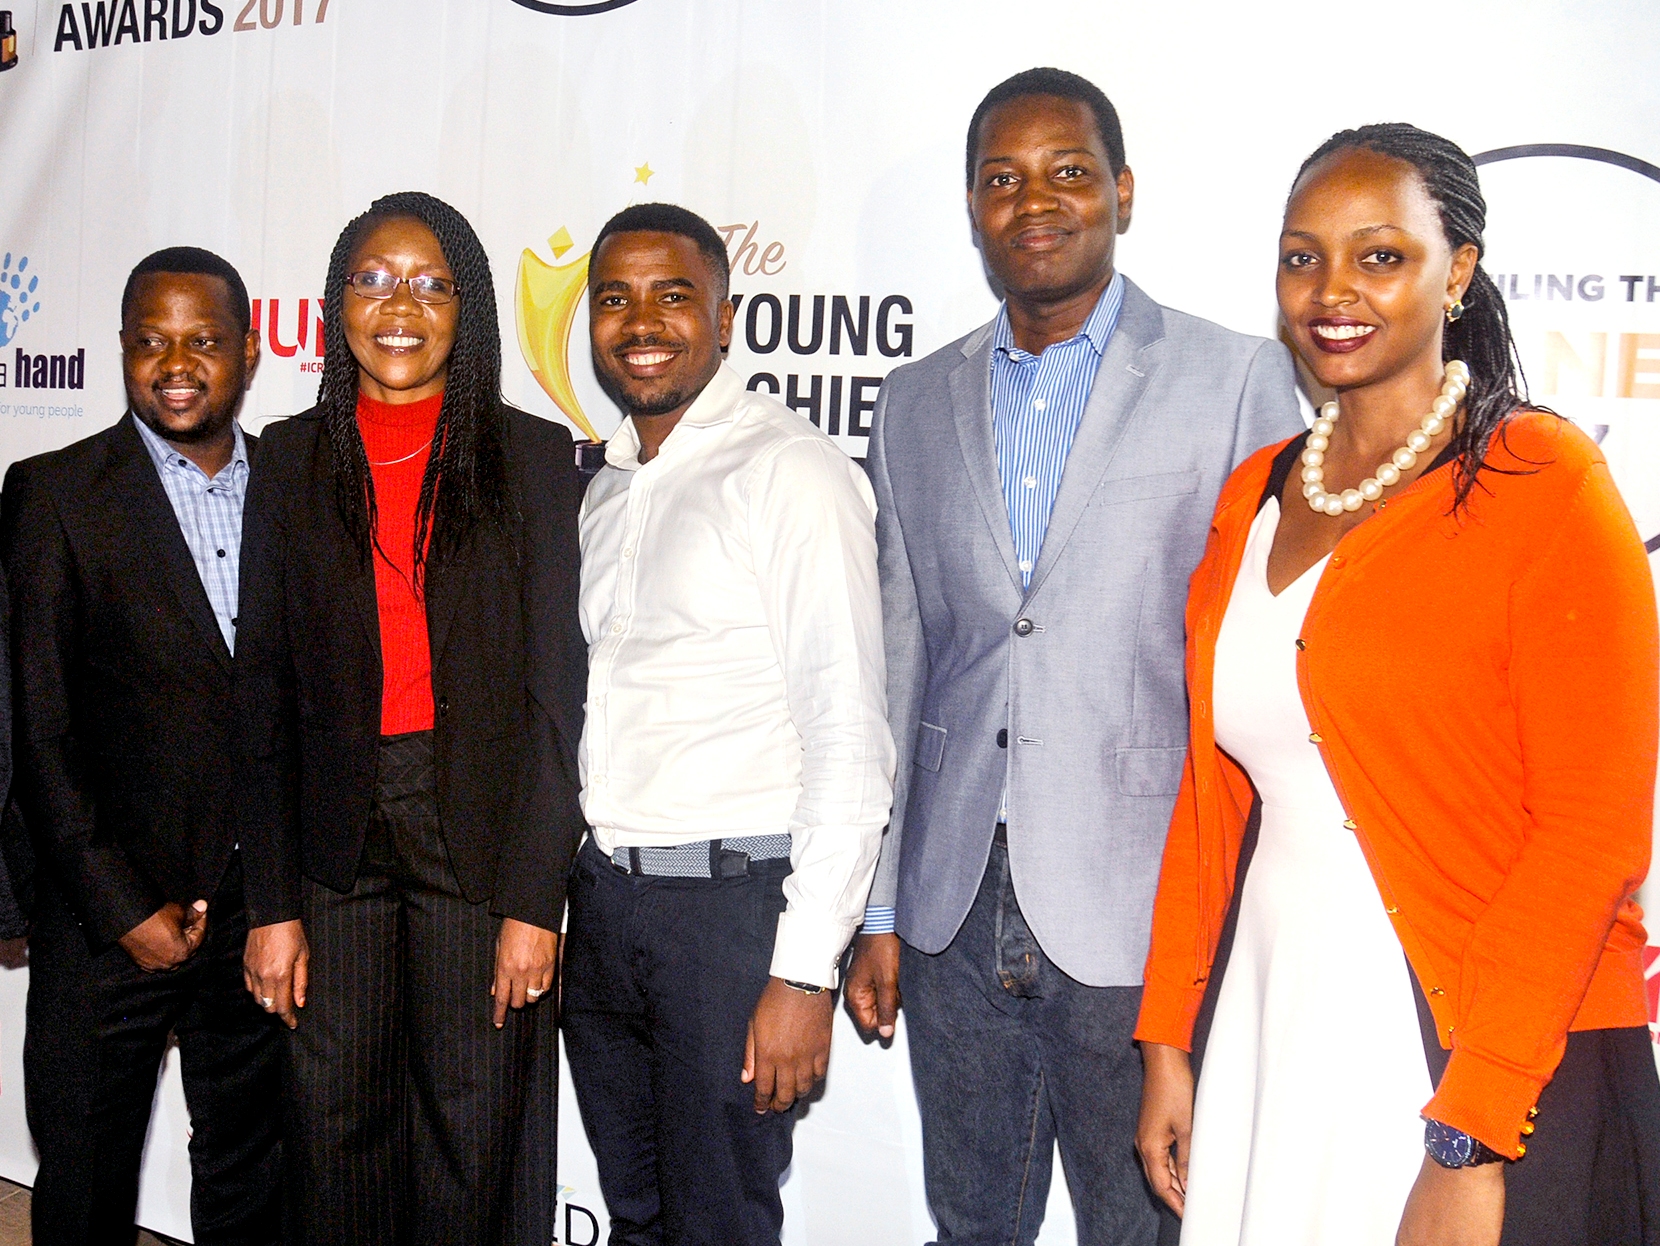 Chairperson, Reach A Hand Uganda, Joe Kigozi; Progress Chisenga, Marketing Director, Vodafone Uganda; Humphrey Nabimanya, Team Leader and Founder, Reach A Hand Uganda; Ivan Kyambadde, Co-Founder- Young Achievers Awards;  and Fiona Kayitesi, Youth Program Manager, Vodafone Uganda pose for a photo at the Young Achievers Awards nominee unveiling event recently at Kampala Serena Hotel. Vodafone JUMP is partnering with Reach A Hand to together inspire and empower young people.